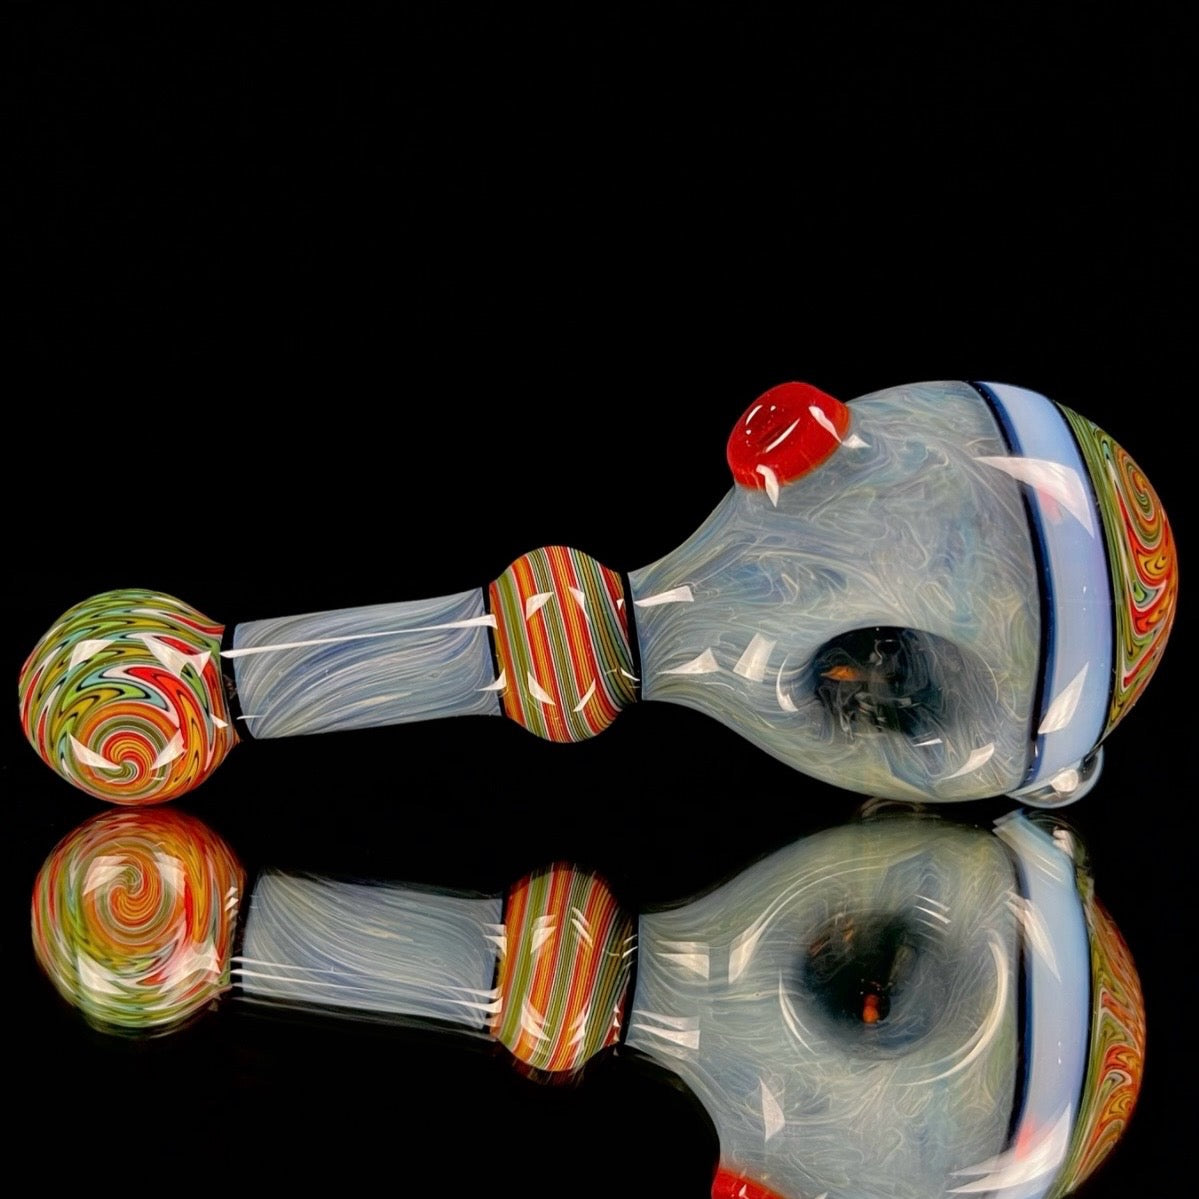 Blue Moon spoon by Mercurius Glass